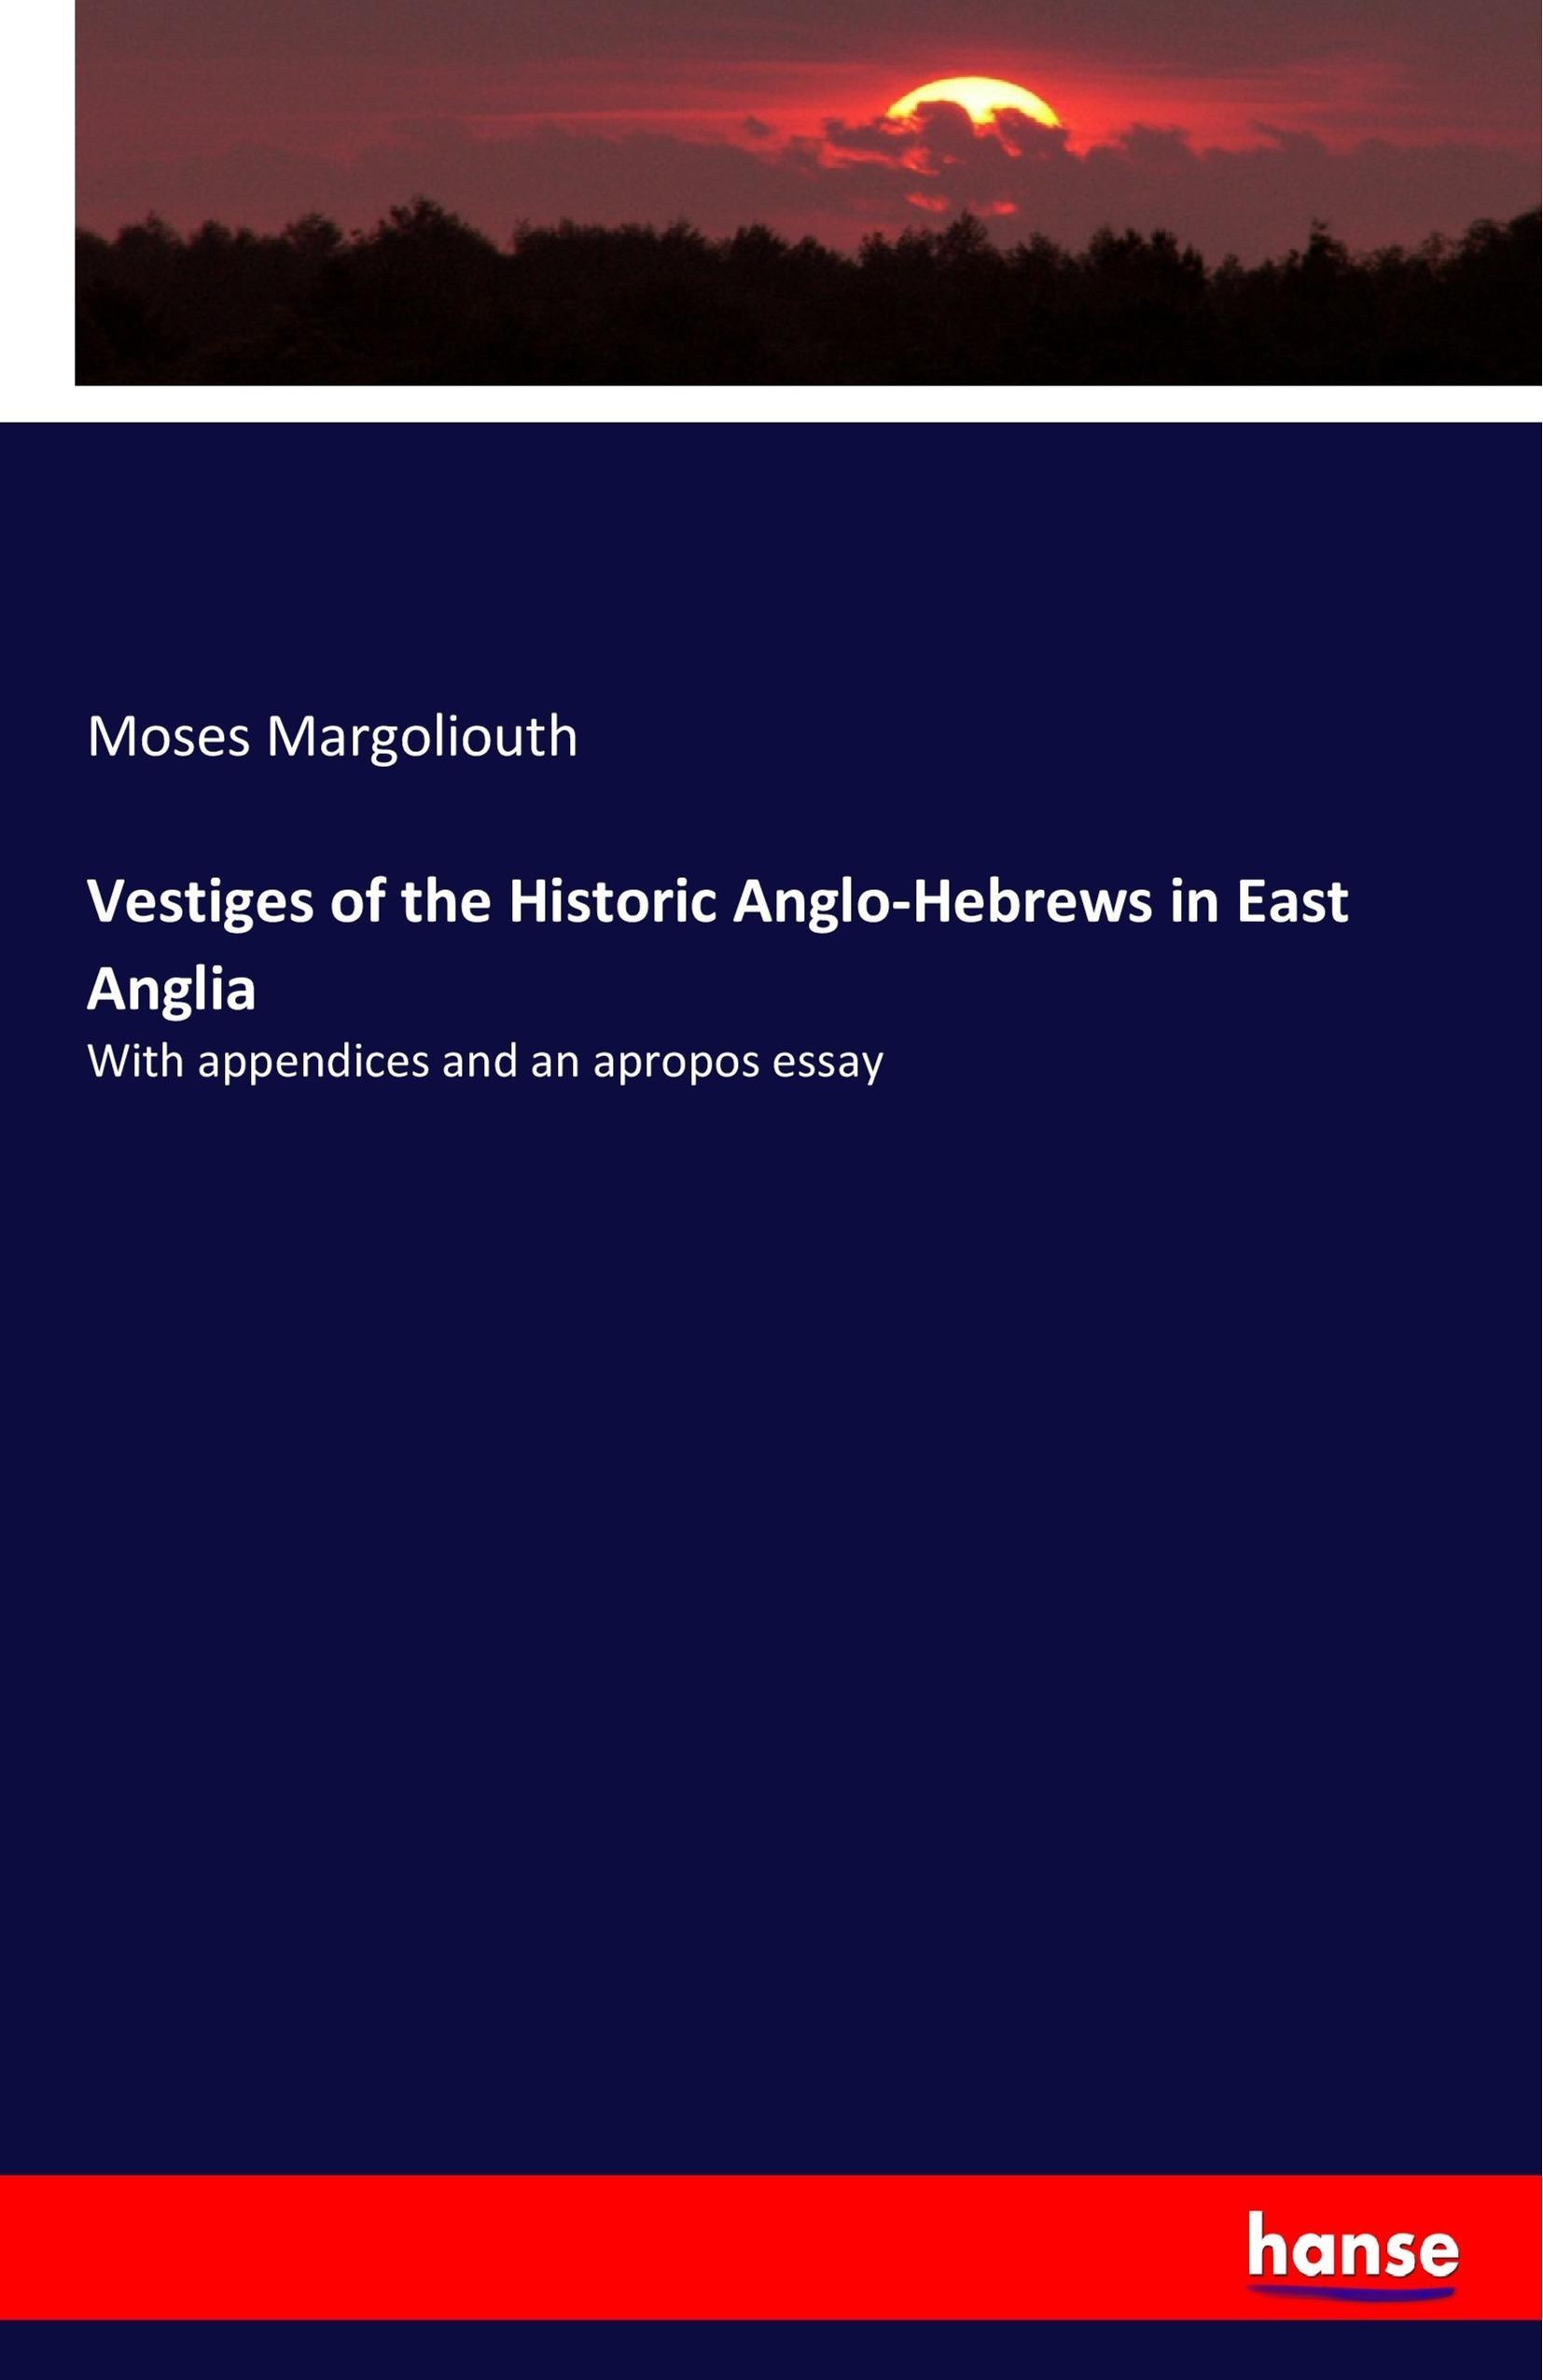 Vestiges of the Historic Anglo-Hebrews in East Anglia - Margoliouth, Moses